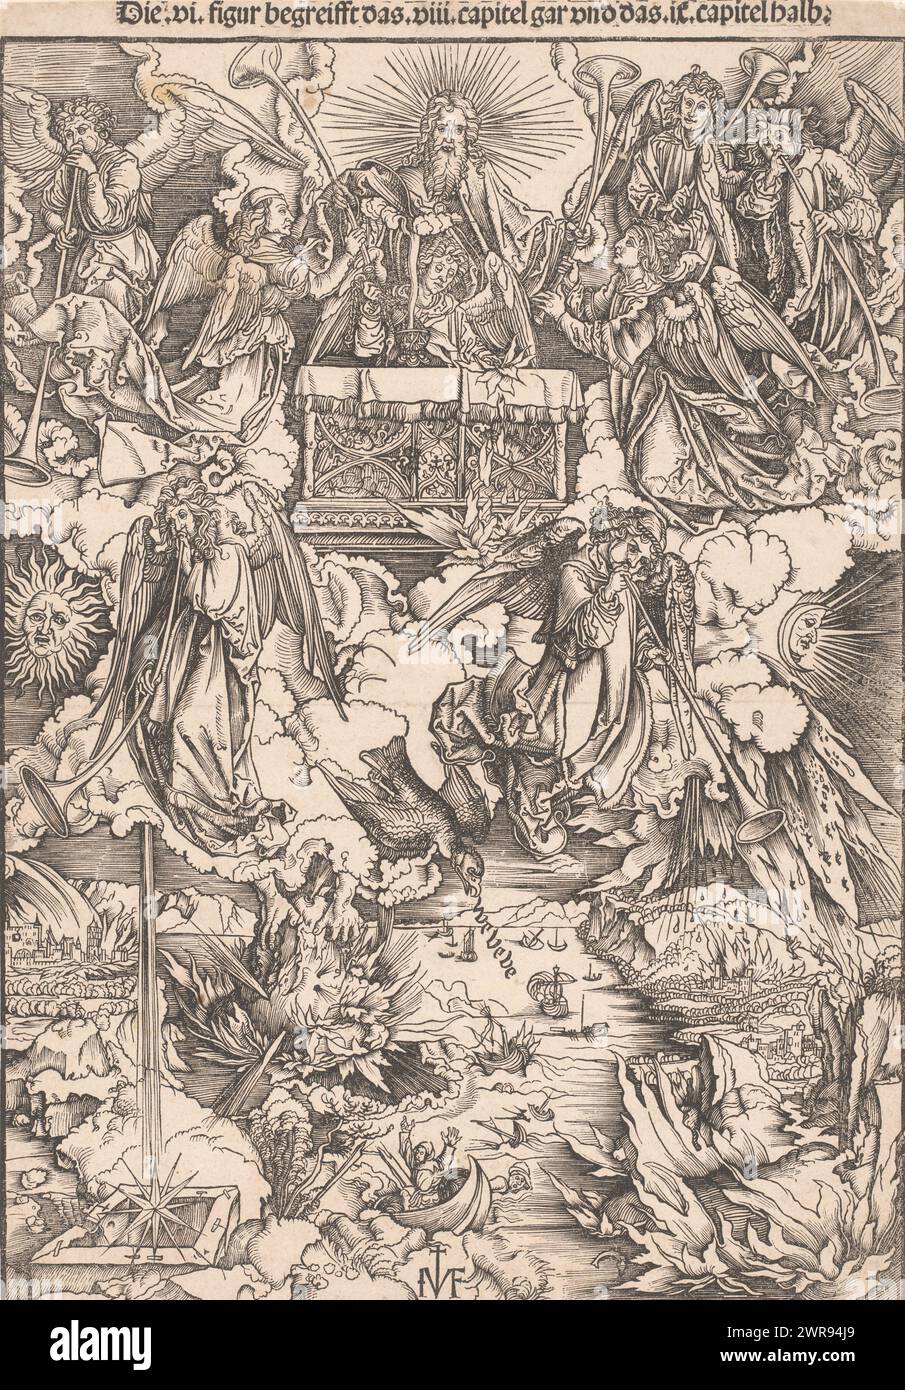 Blowing of the first five trumpets, Copies of Dürer's Apocalypse (series title), After the opening of the seventh seal by the Lamb, seven angels appeared, who received trumpets from God to blow. The first angel caused hail, fire and blood to descend on the earth, the second caused a burning mountain to fall into the sea, the third caused the water to be poisoned by pouring a burning star into it, the fourth caused the sun, moon and stars to be partially darkened. and the fifth angel dropped a star into a bottomless pit. An eagle crows the words 'Ve Ve Ve'. Stock Photo